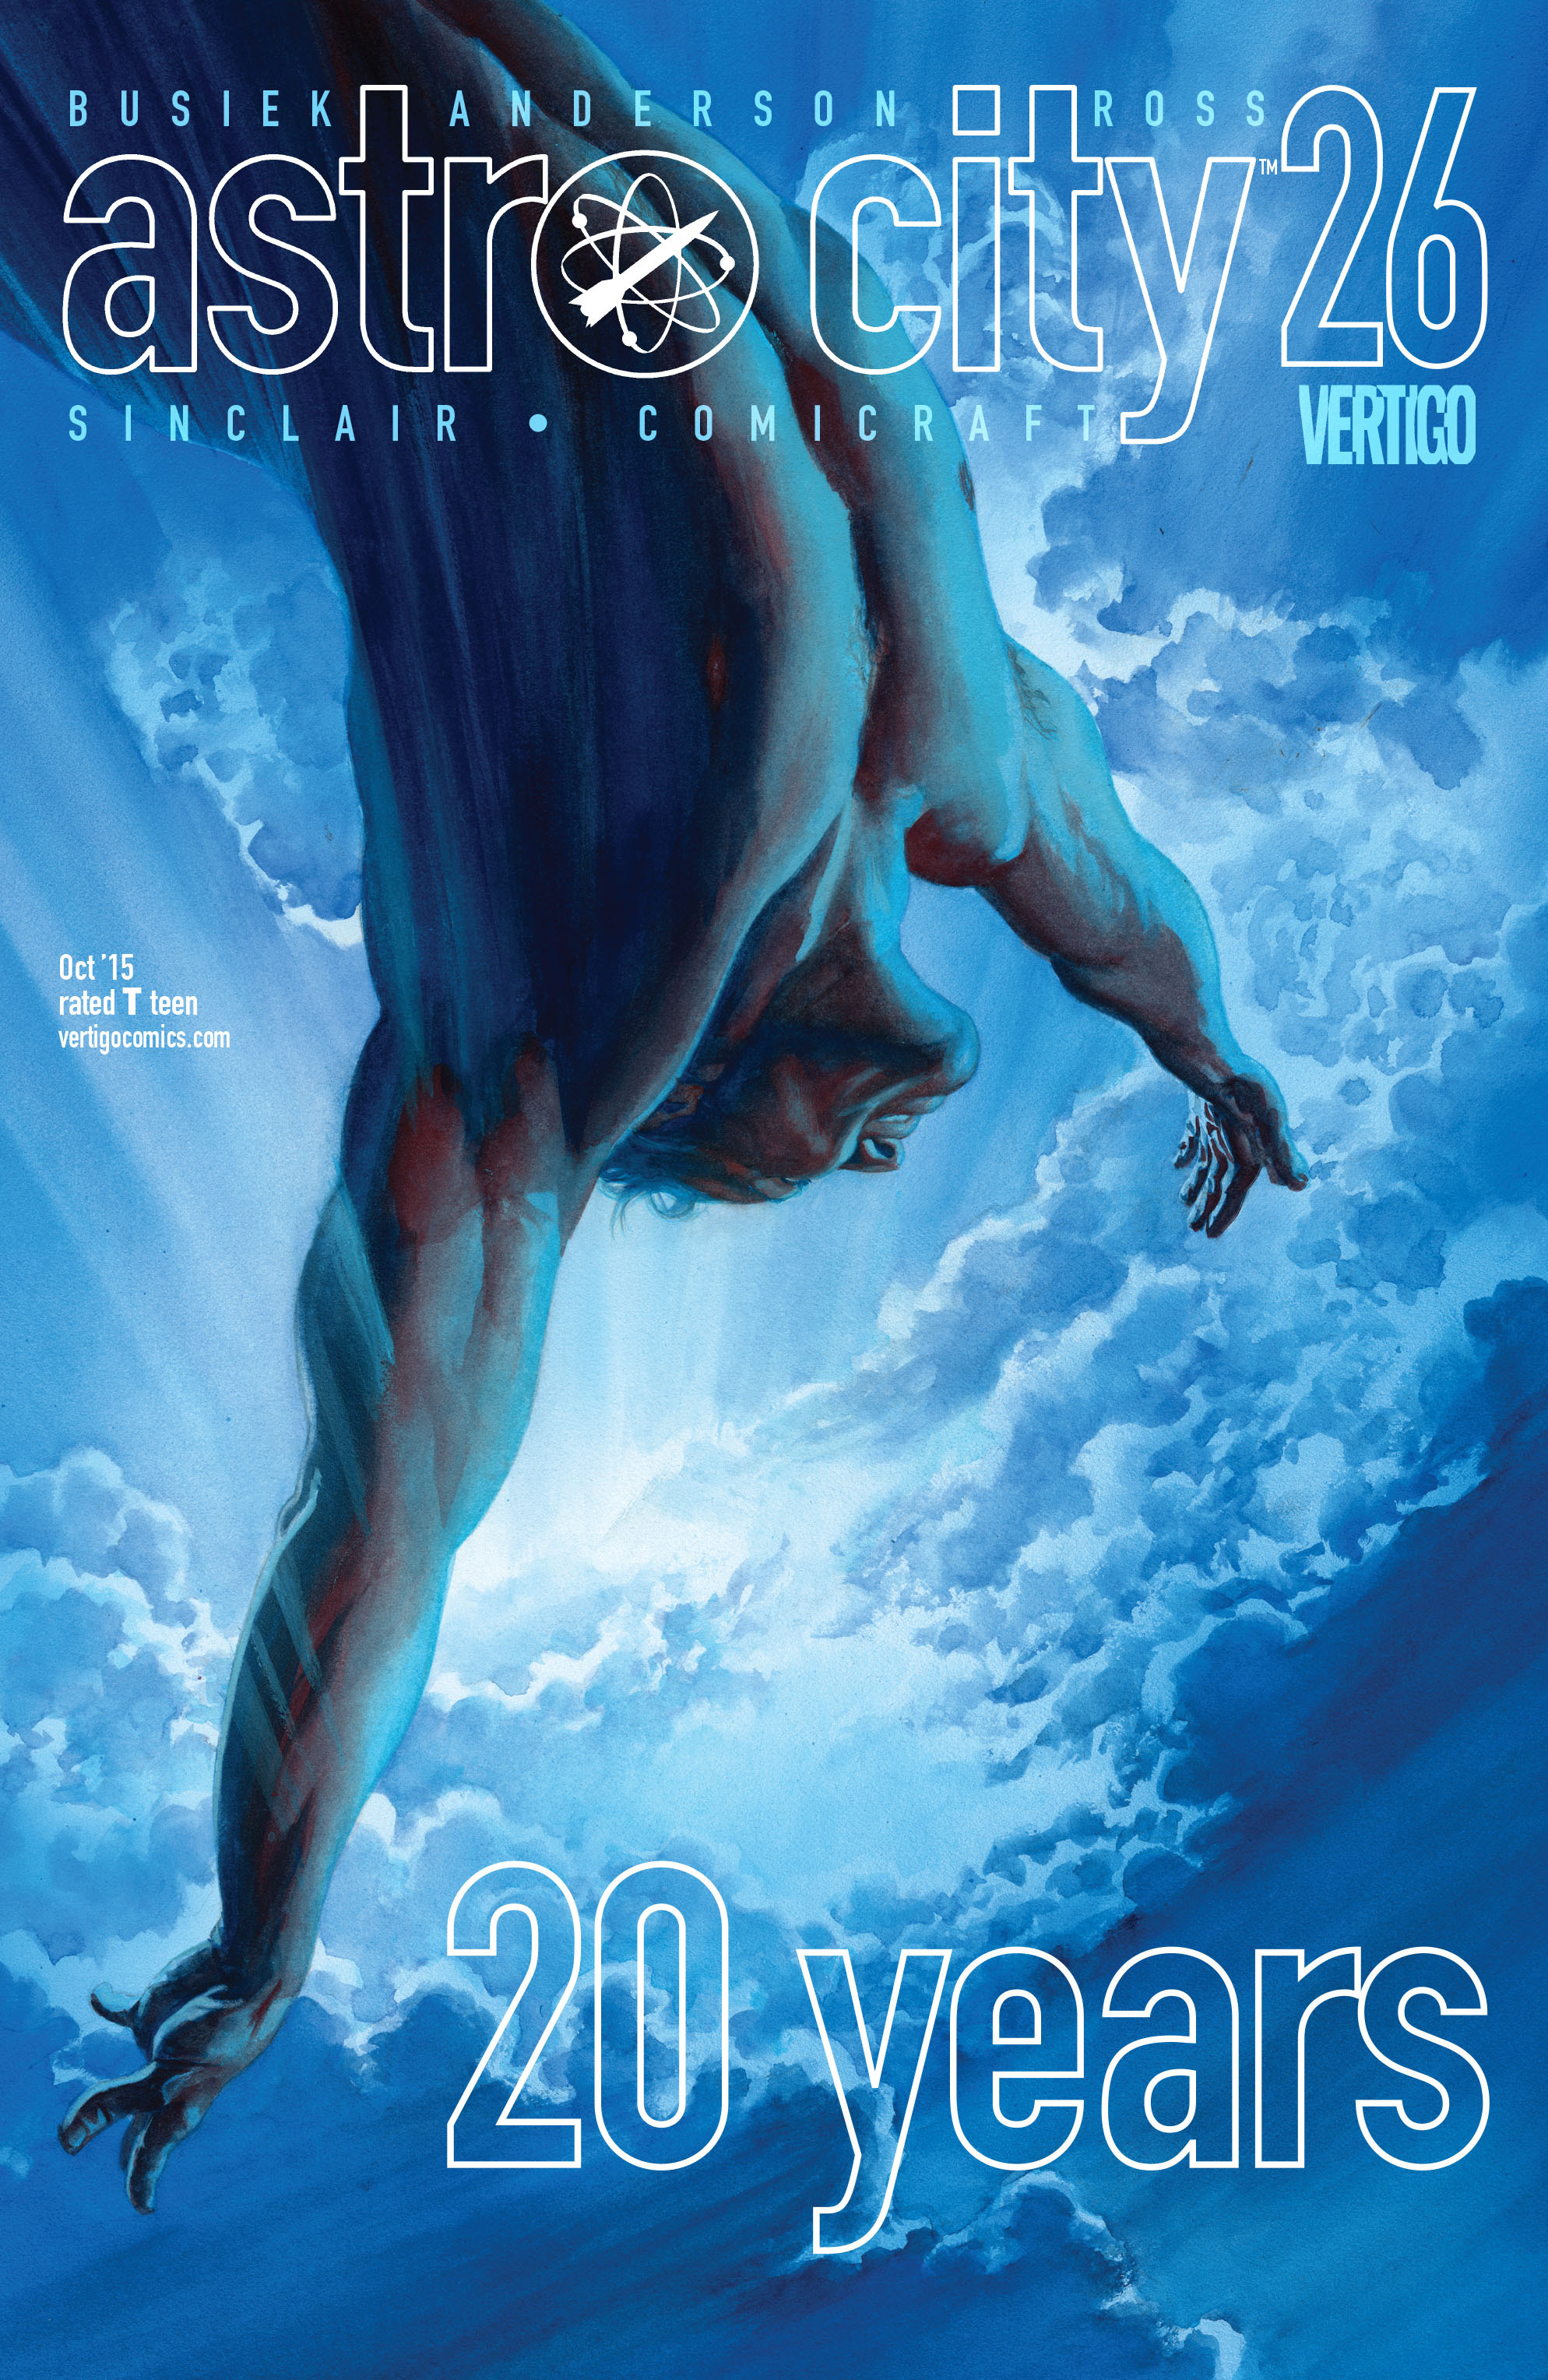 Astro City (2013-): Chapter 26 - Page 1